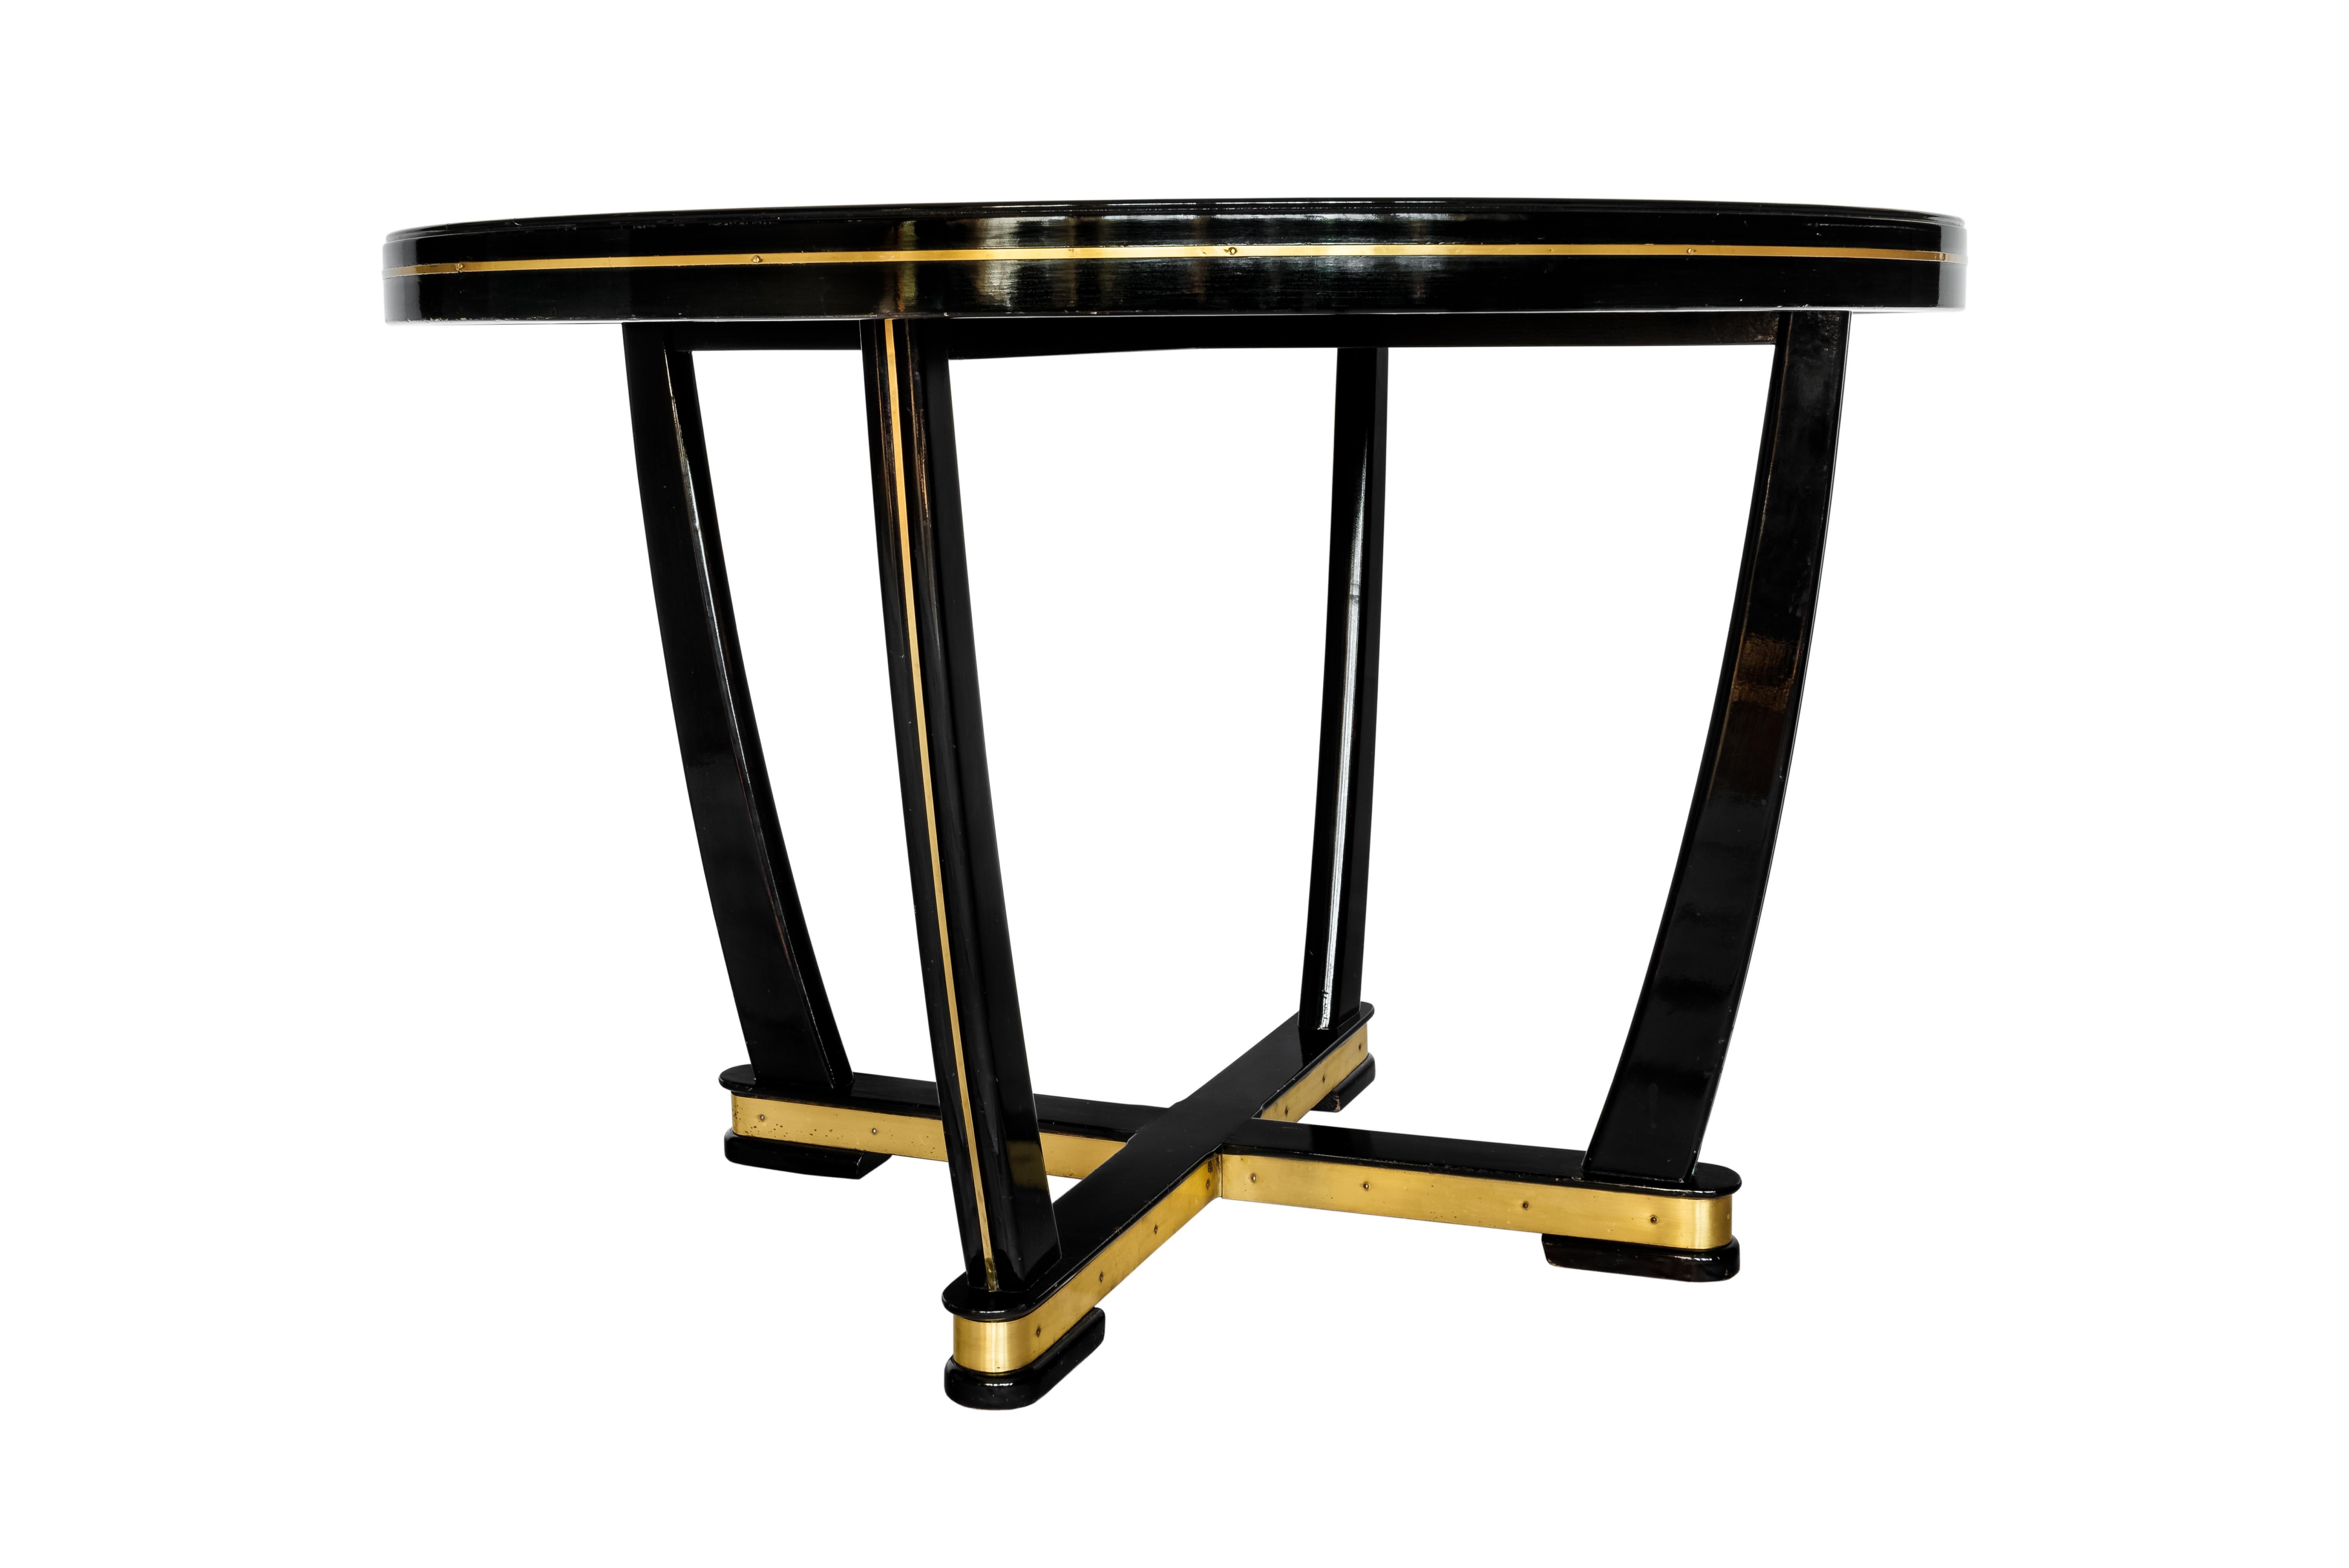 Art Deco Black Lacquer Coffee Table attributed to Jean-Henri Jansen for Maison Jansen, Paris, circa 1925.
Elegant Art Deco side table or coffee table from the 1920s.
It Impresses with its simple but elegant design with filigree legs and high-quality